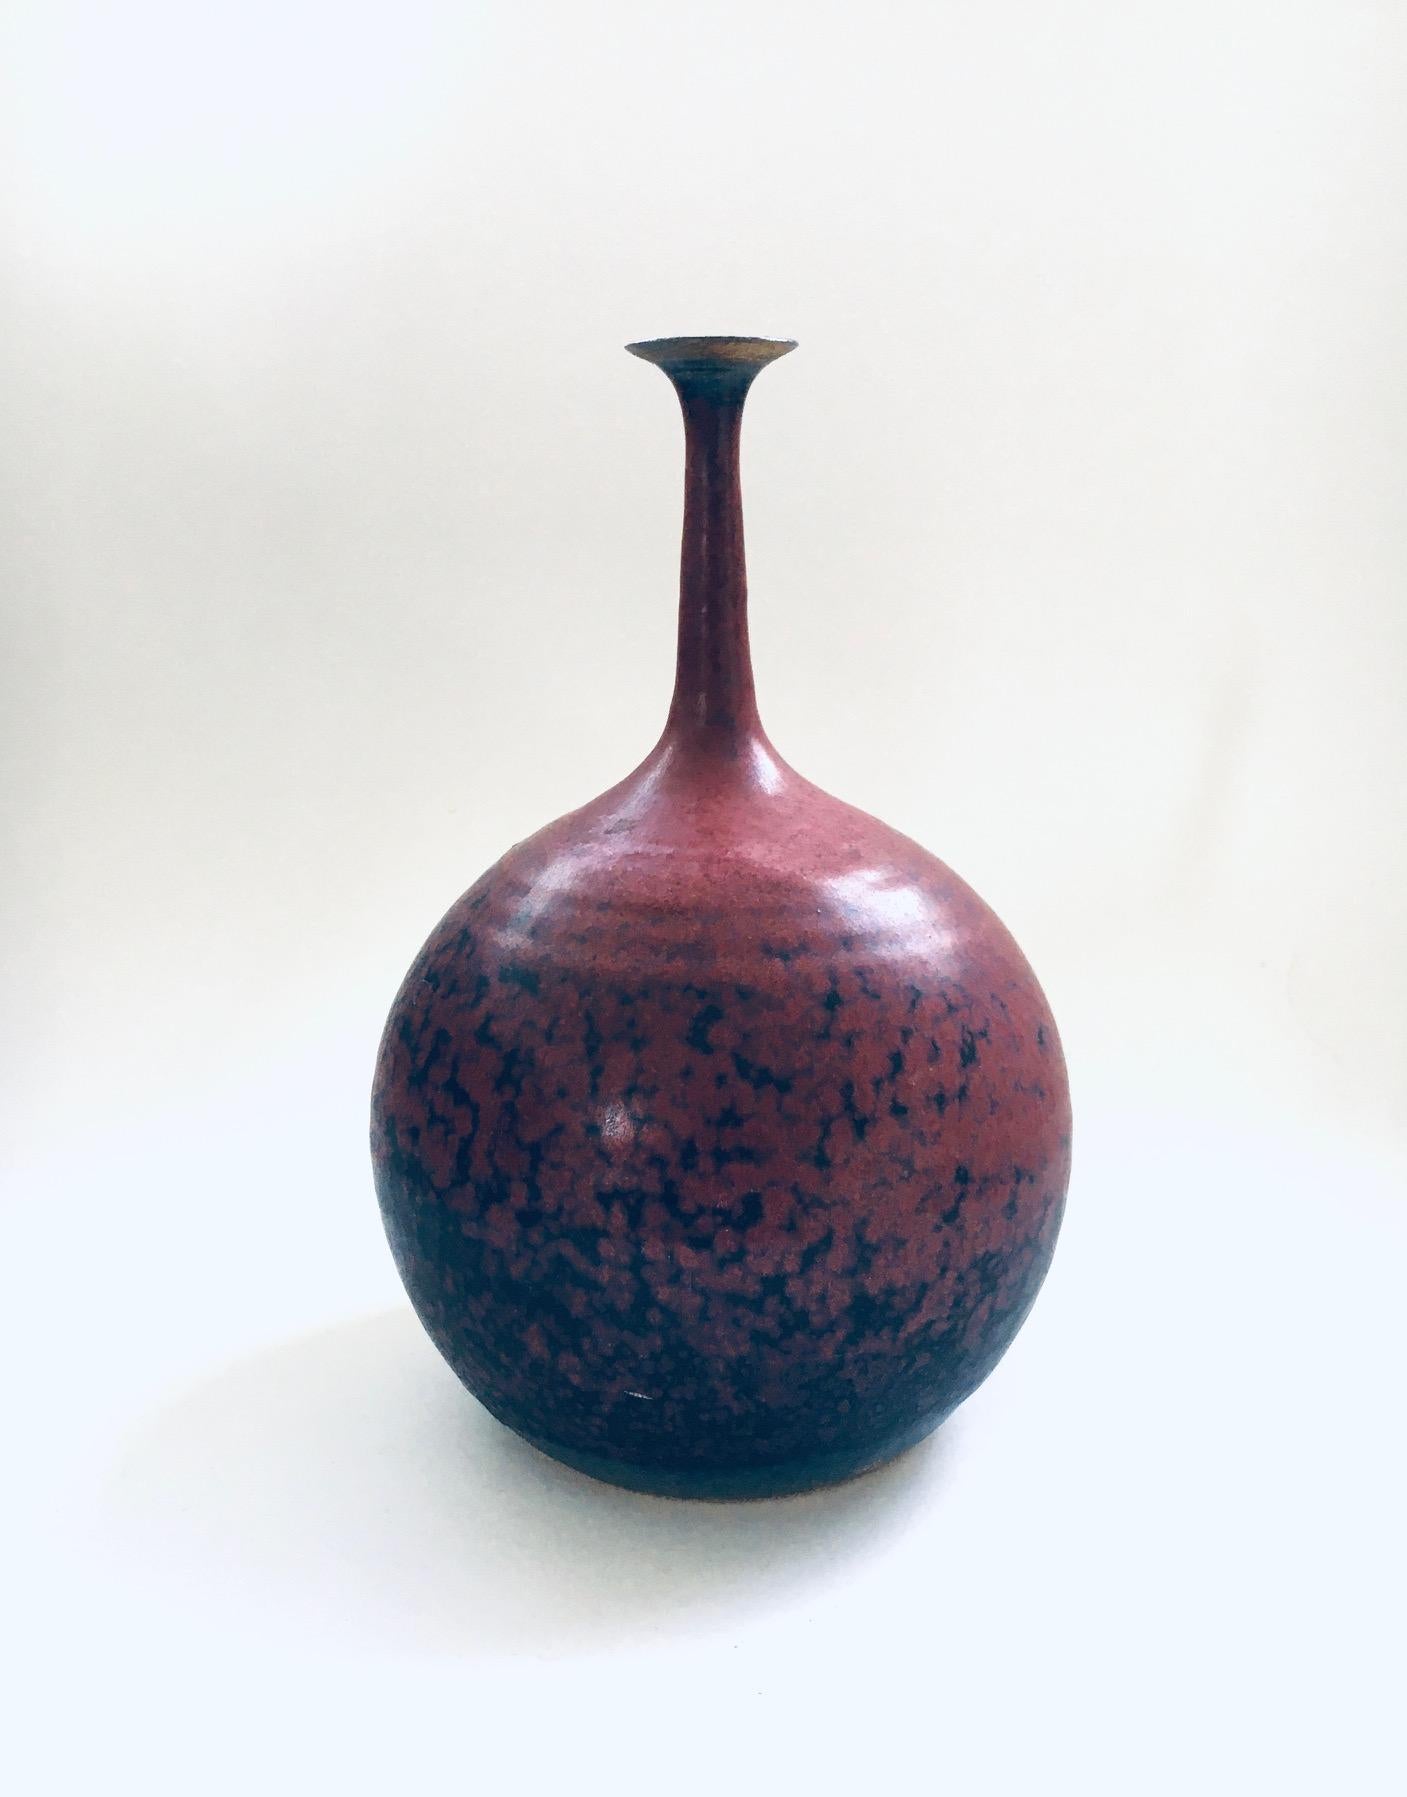 Vintage Art Pottery Studio Spout Vase by Gubbels Helden. Made in The Netherlands, 1970's / 80's period. Ball shaped vase with fine spout in bordeaux red and blue glazes. Stamped on the bottom. This comes in very good condition. Measures 24,5cm x